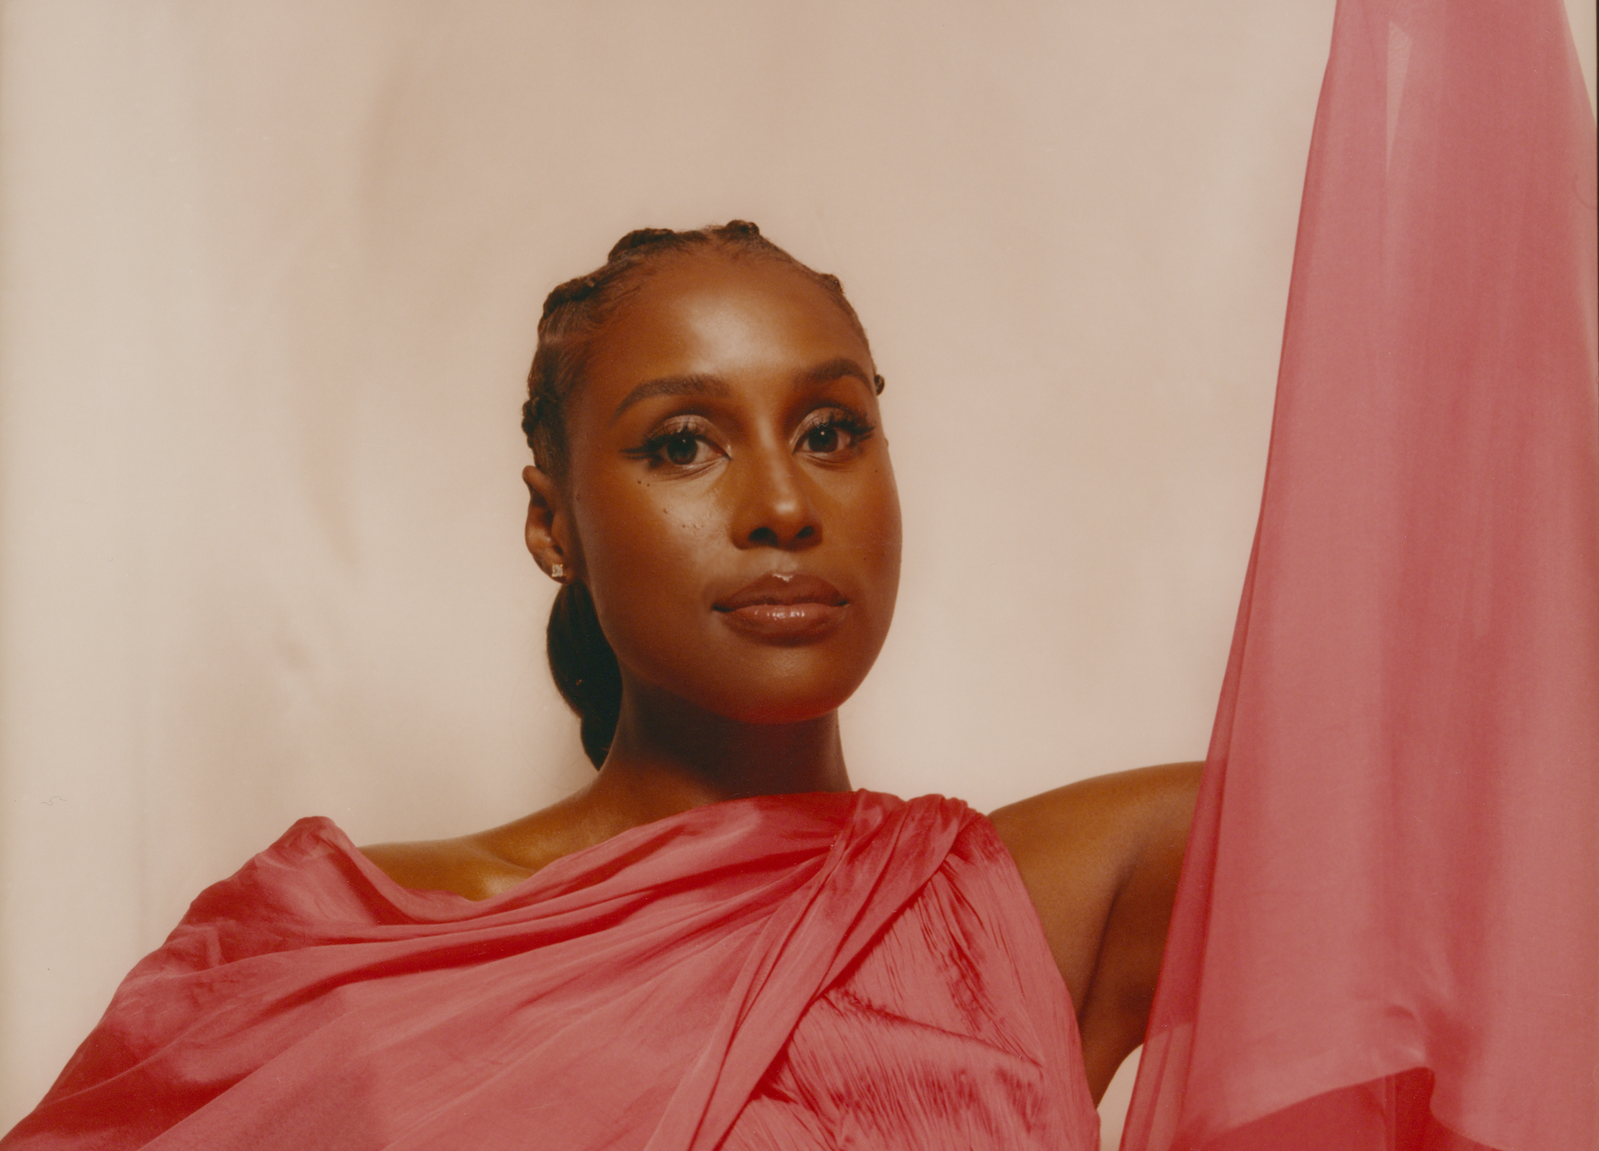 Issa Rae on Setting Boundaries and Priotizing Self-Care